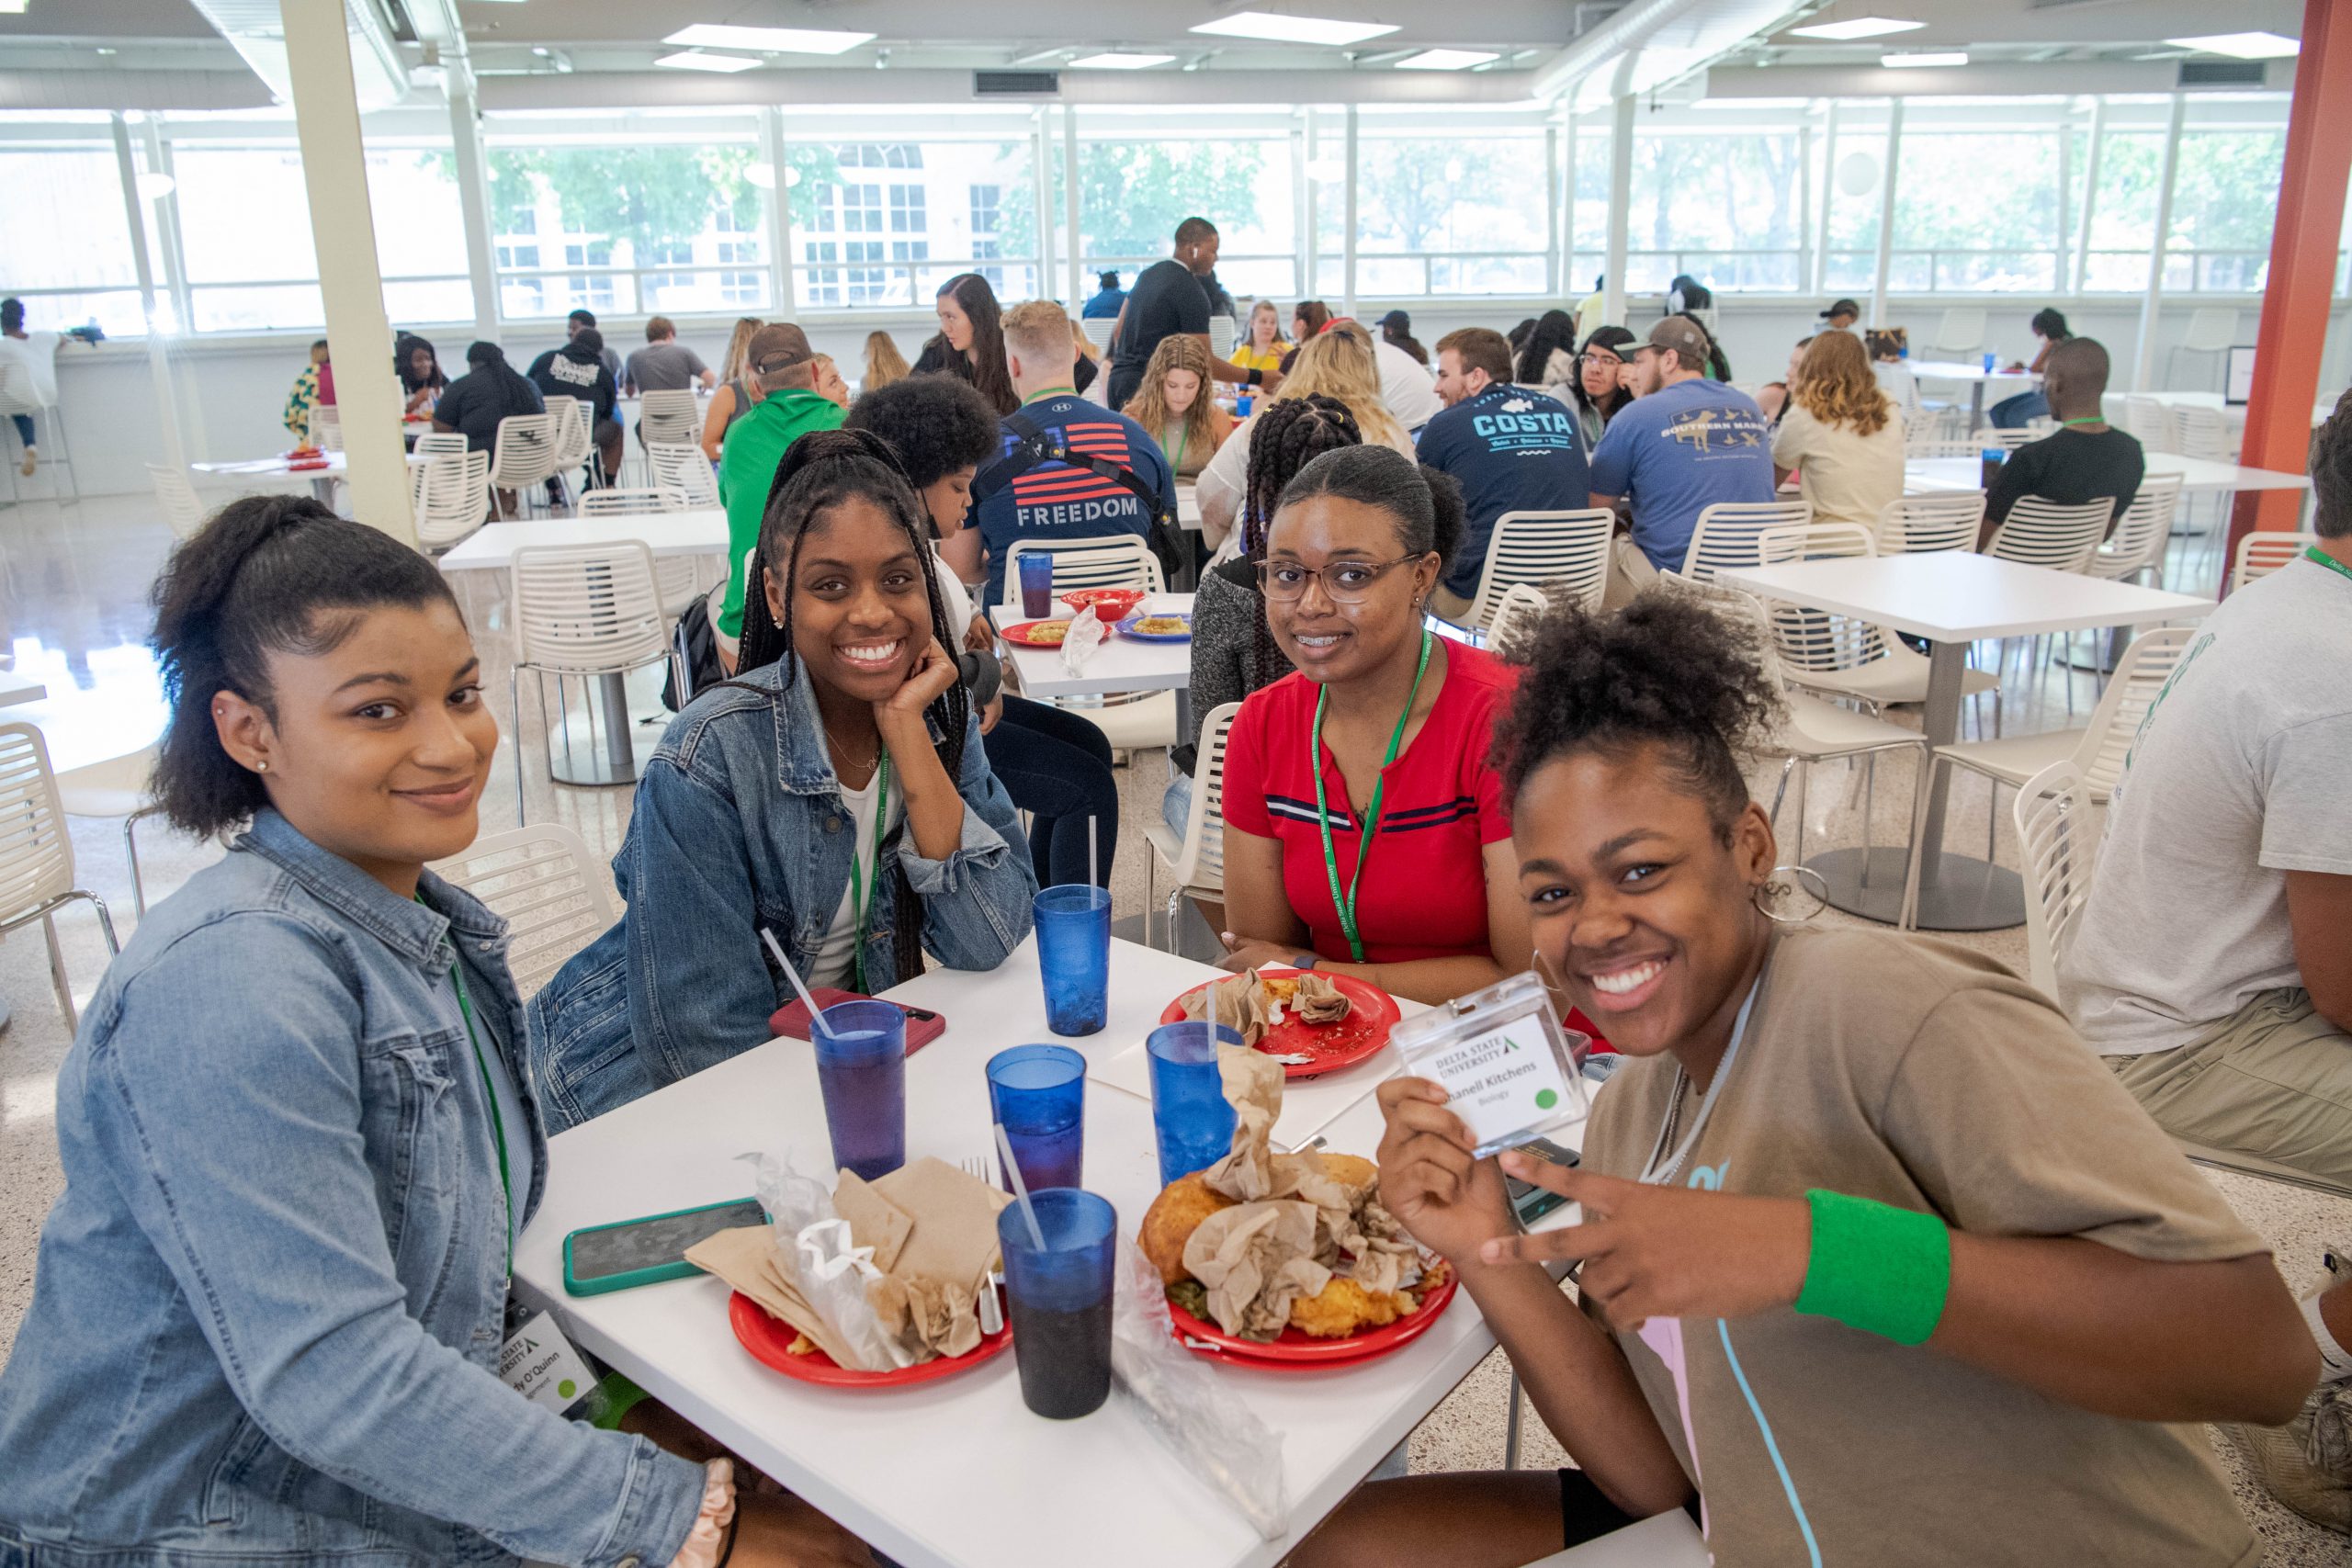 4 young ladies finishing lunch at a table in the cafeteria.